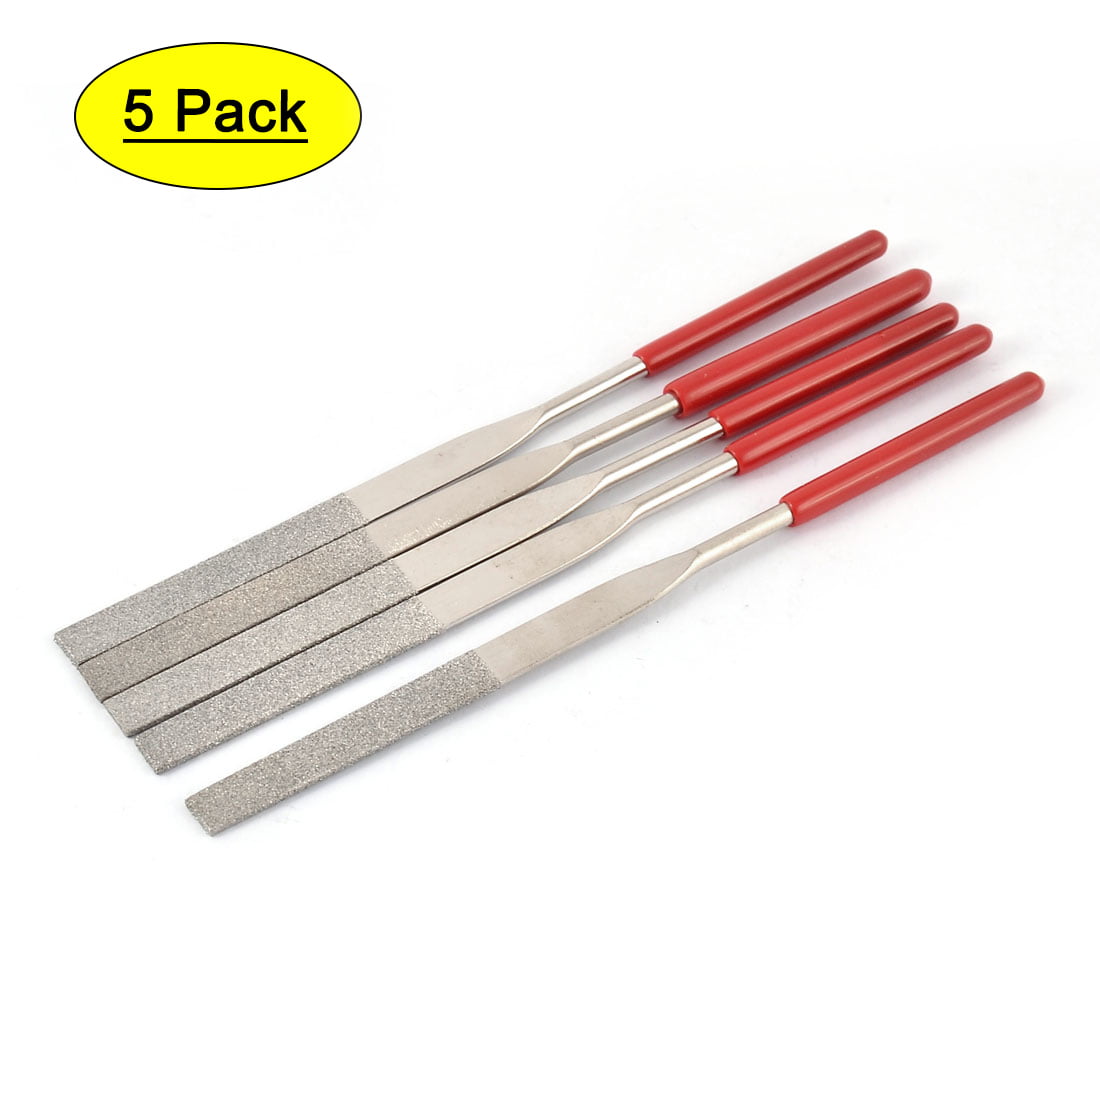 10 Pcs 140mm x 3mm Round Shaped Faux Diamond Coated Needle File Repairing Tool 709874911817 